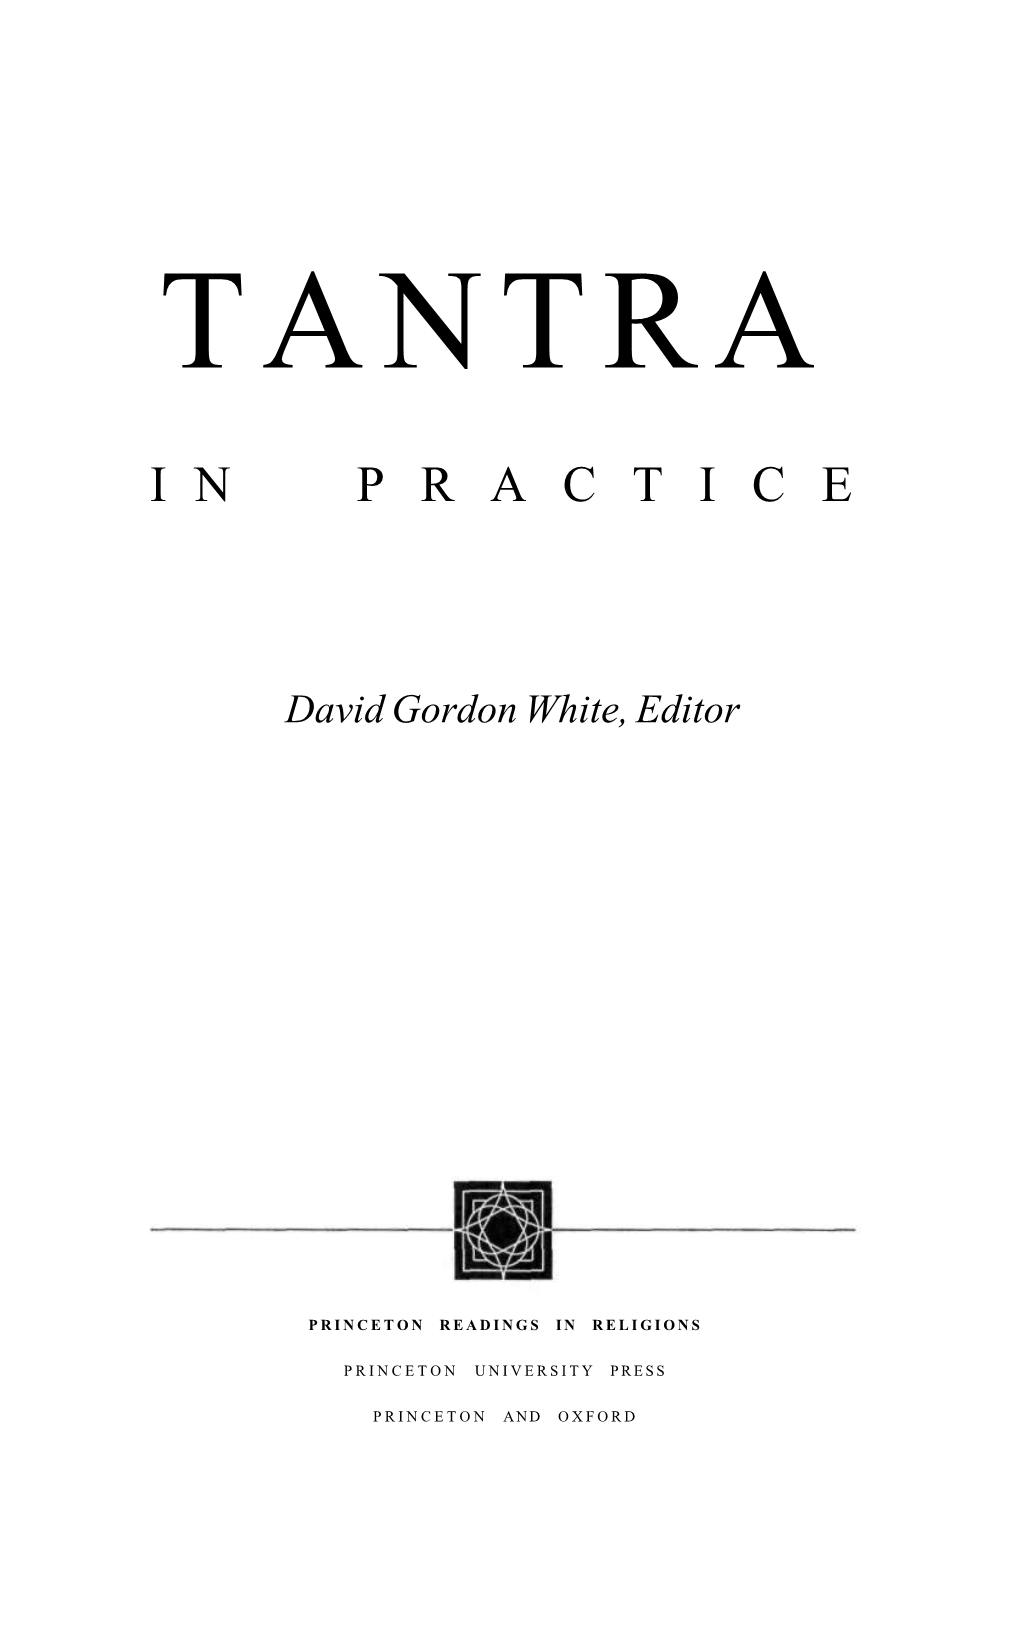 “Longchenpa and the Possession of the Dakinis” from Tantra in Practice